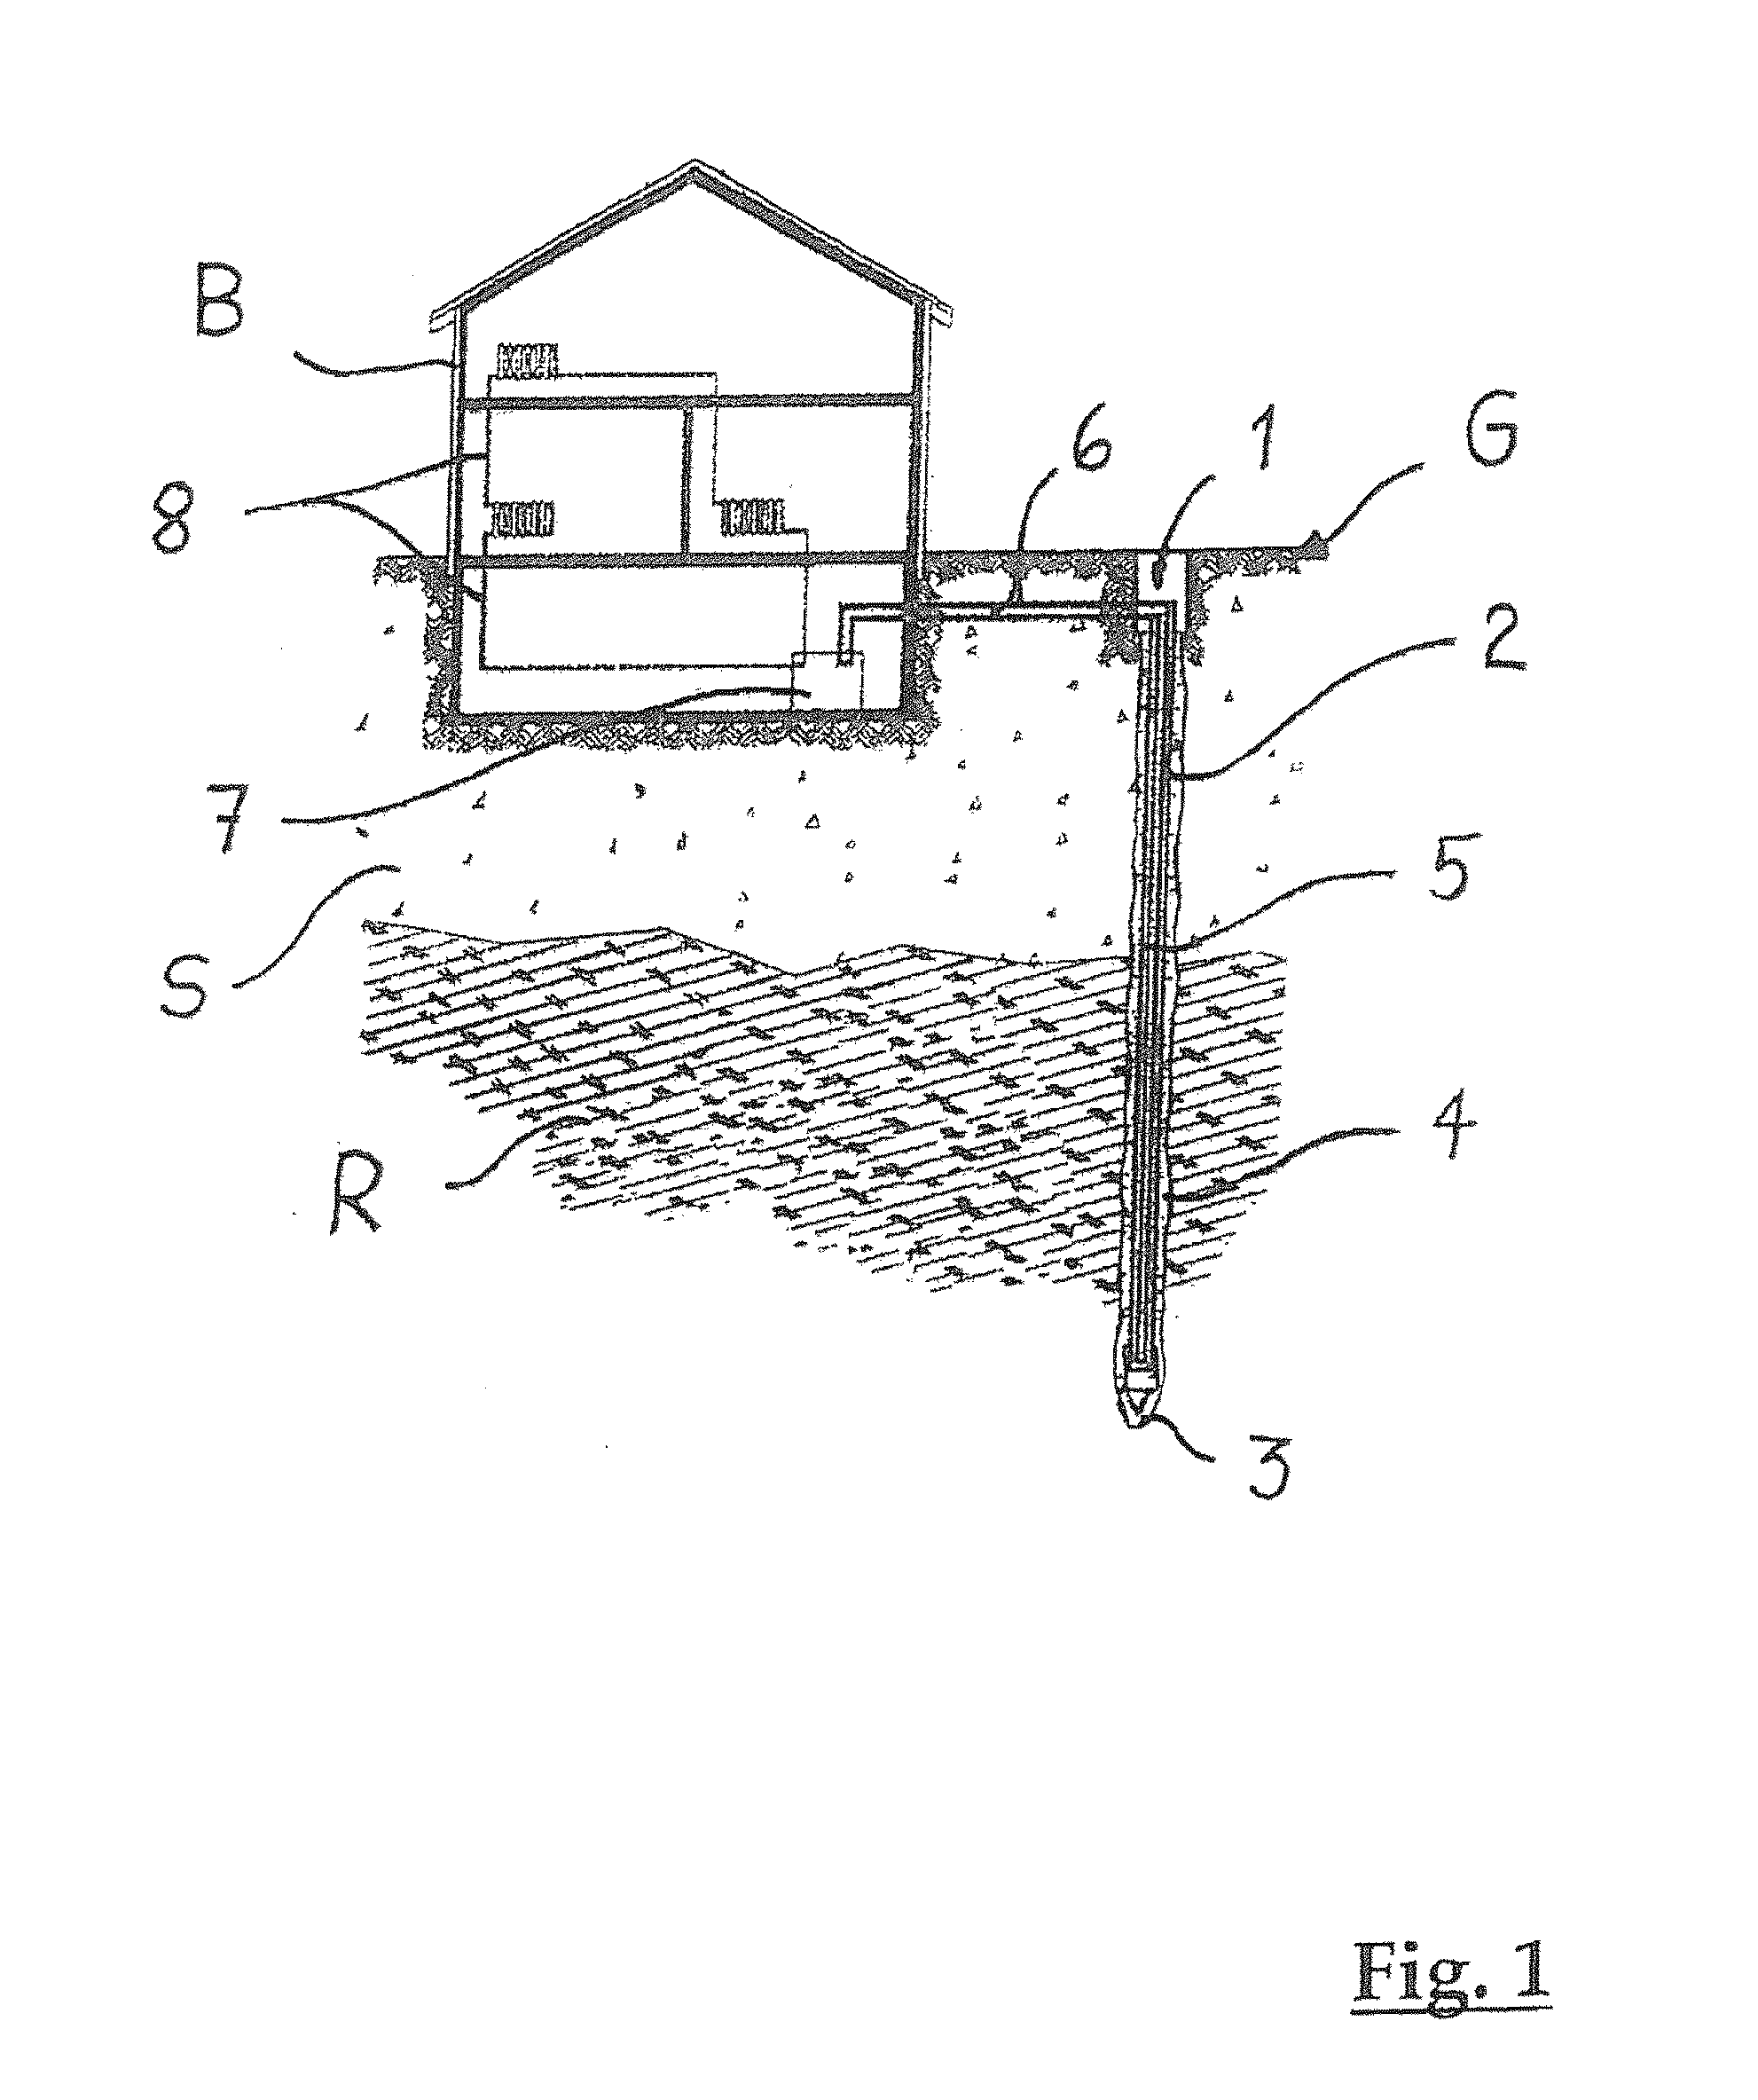 Coaxial ground heat exchanger and method for installing said ground heat exchanger in the ground